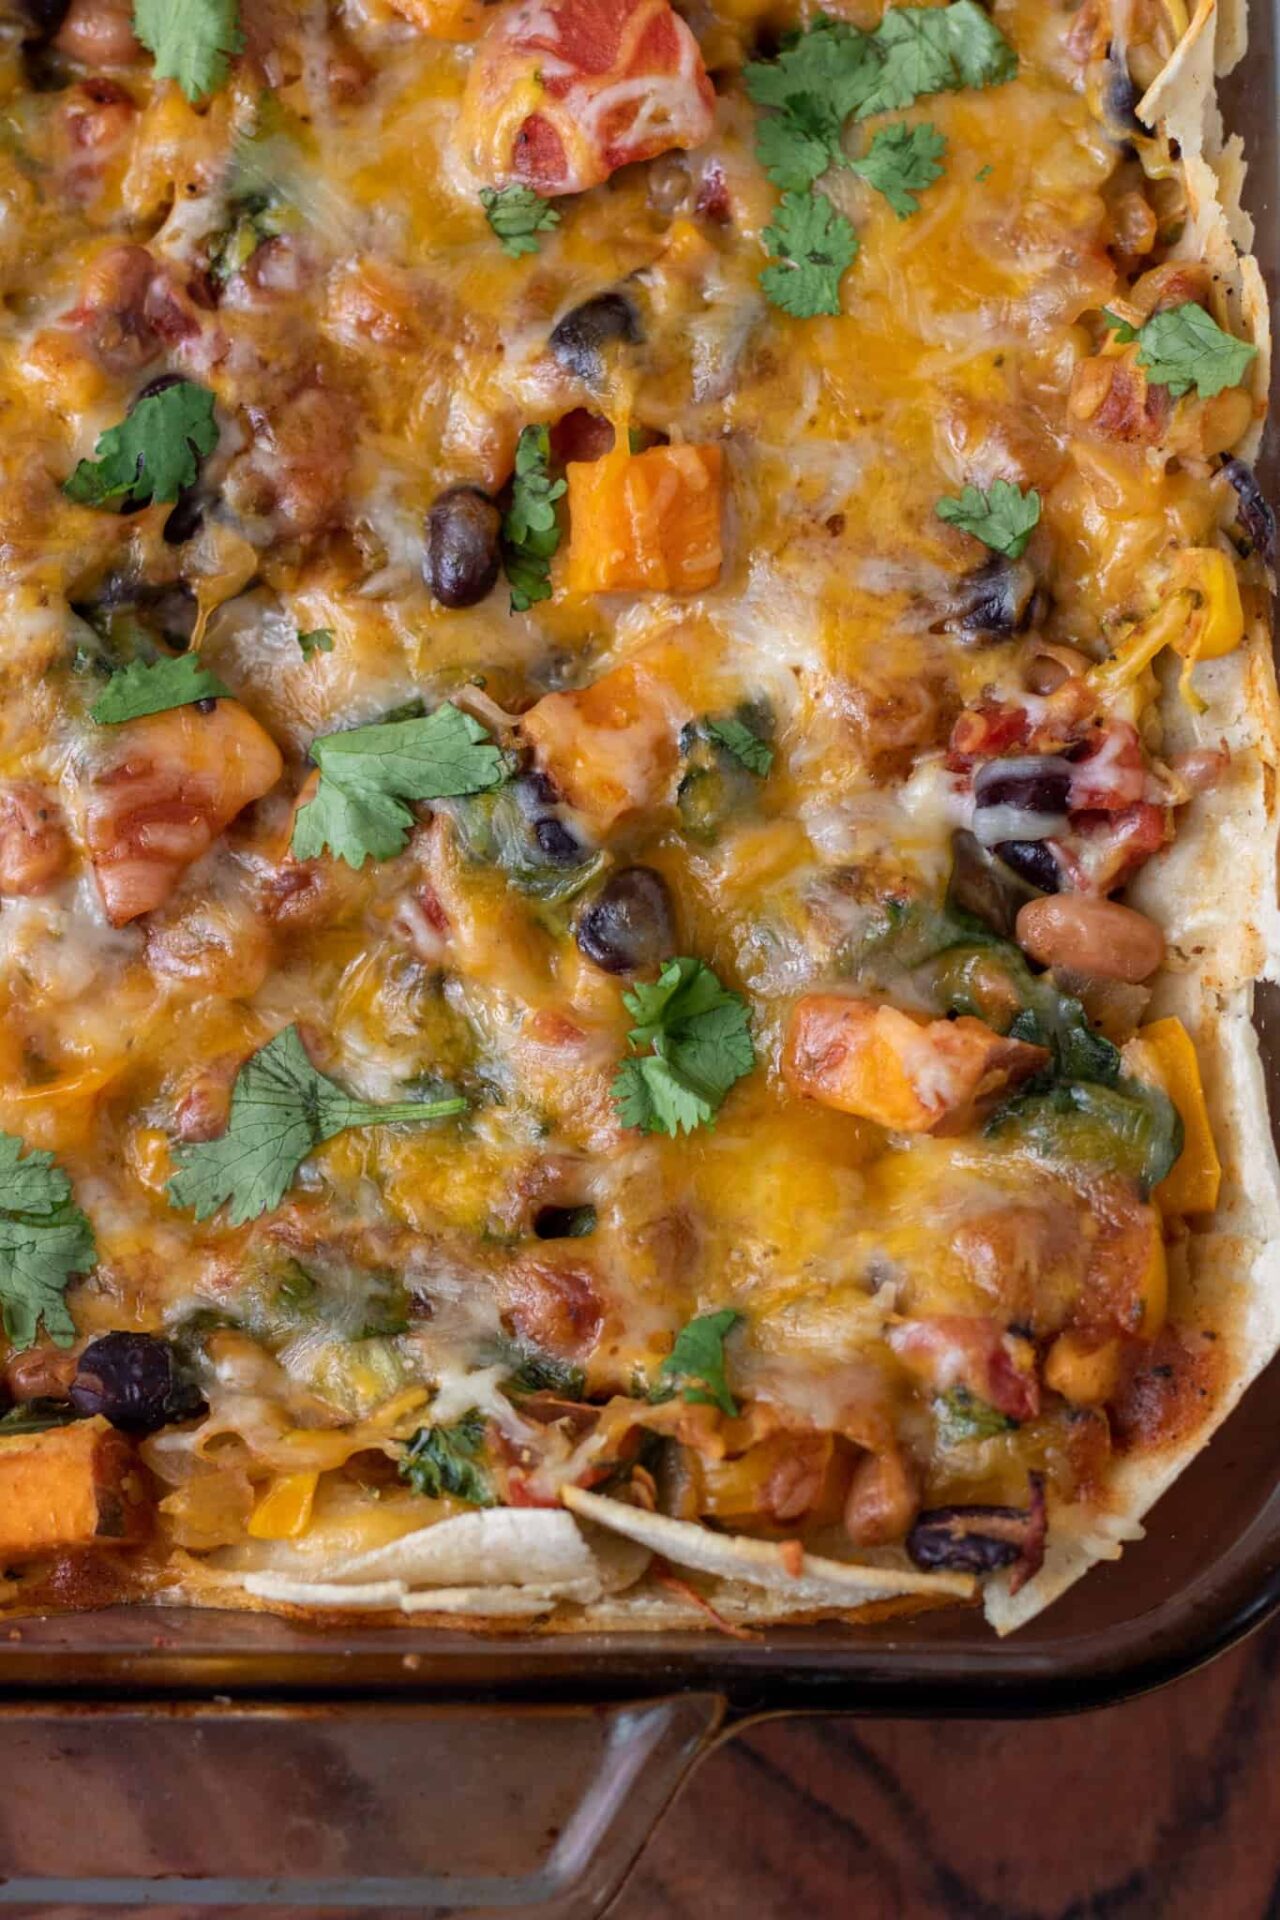 A glass baking dish with enchilada casserole. It's topped with fresh cilantro. You can see the colorful veggies in the casserole